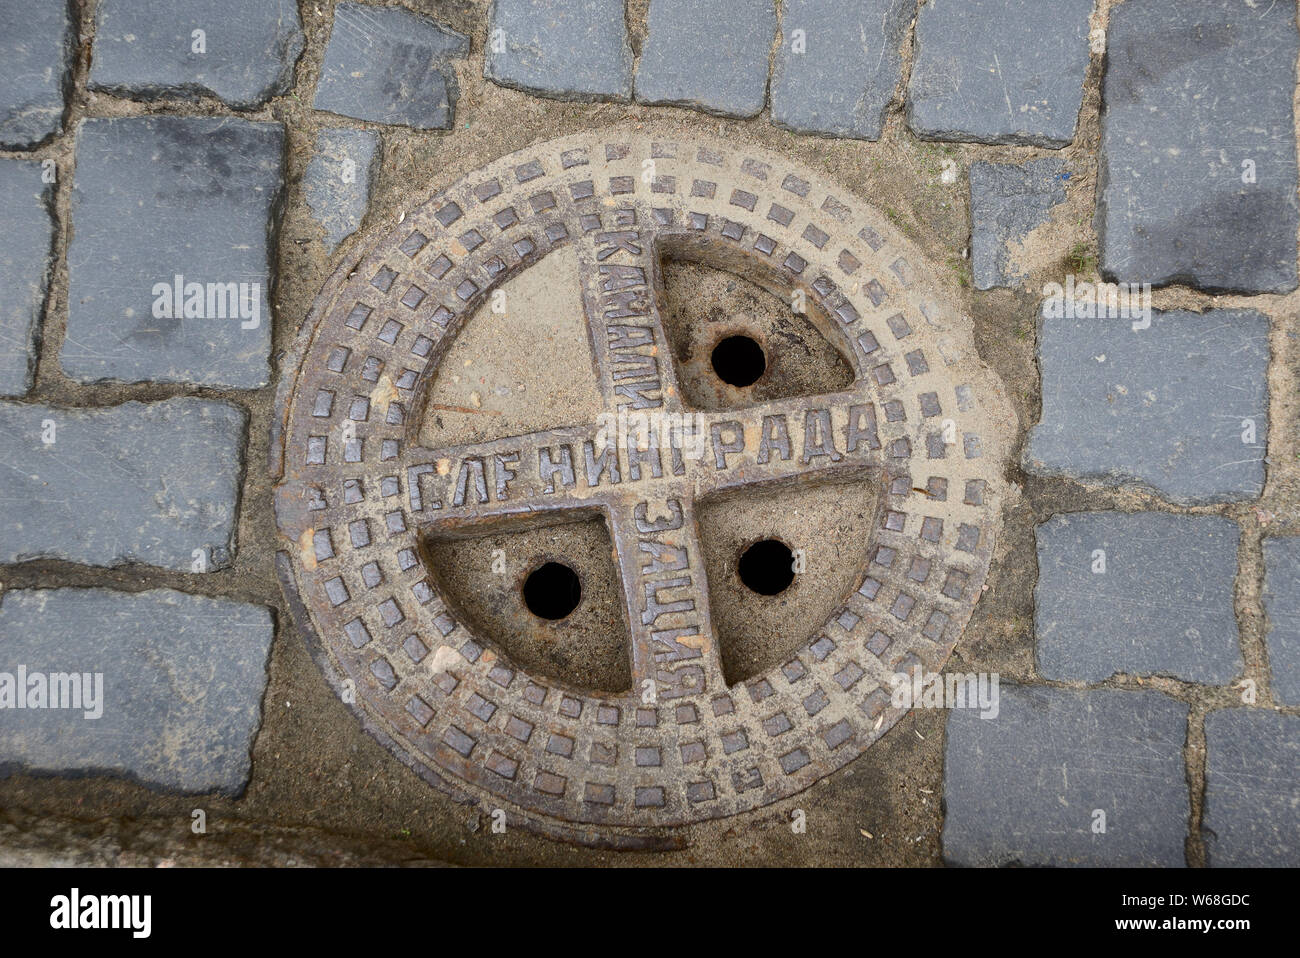 Saint Petersburg, Russia - May 25, 20197: Old manhole of the times of the USSR with the inscription 'sewage Leningrad' Stock Photo